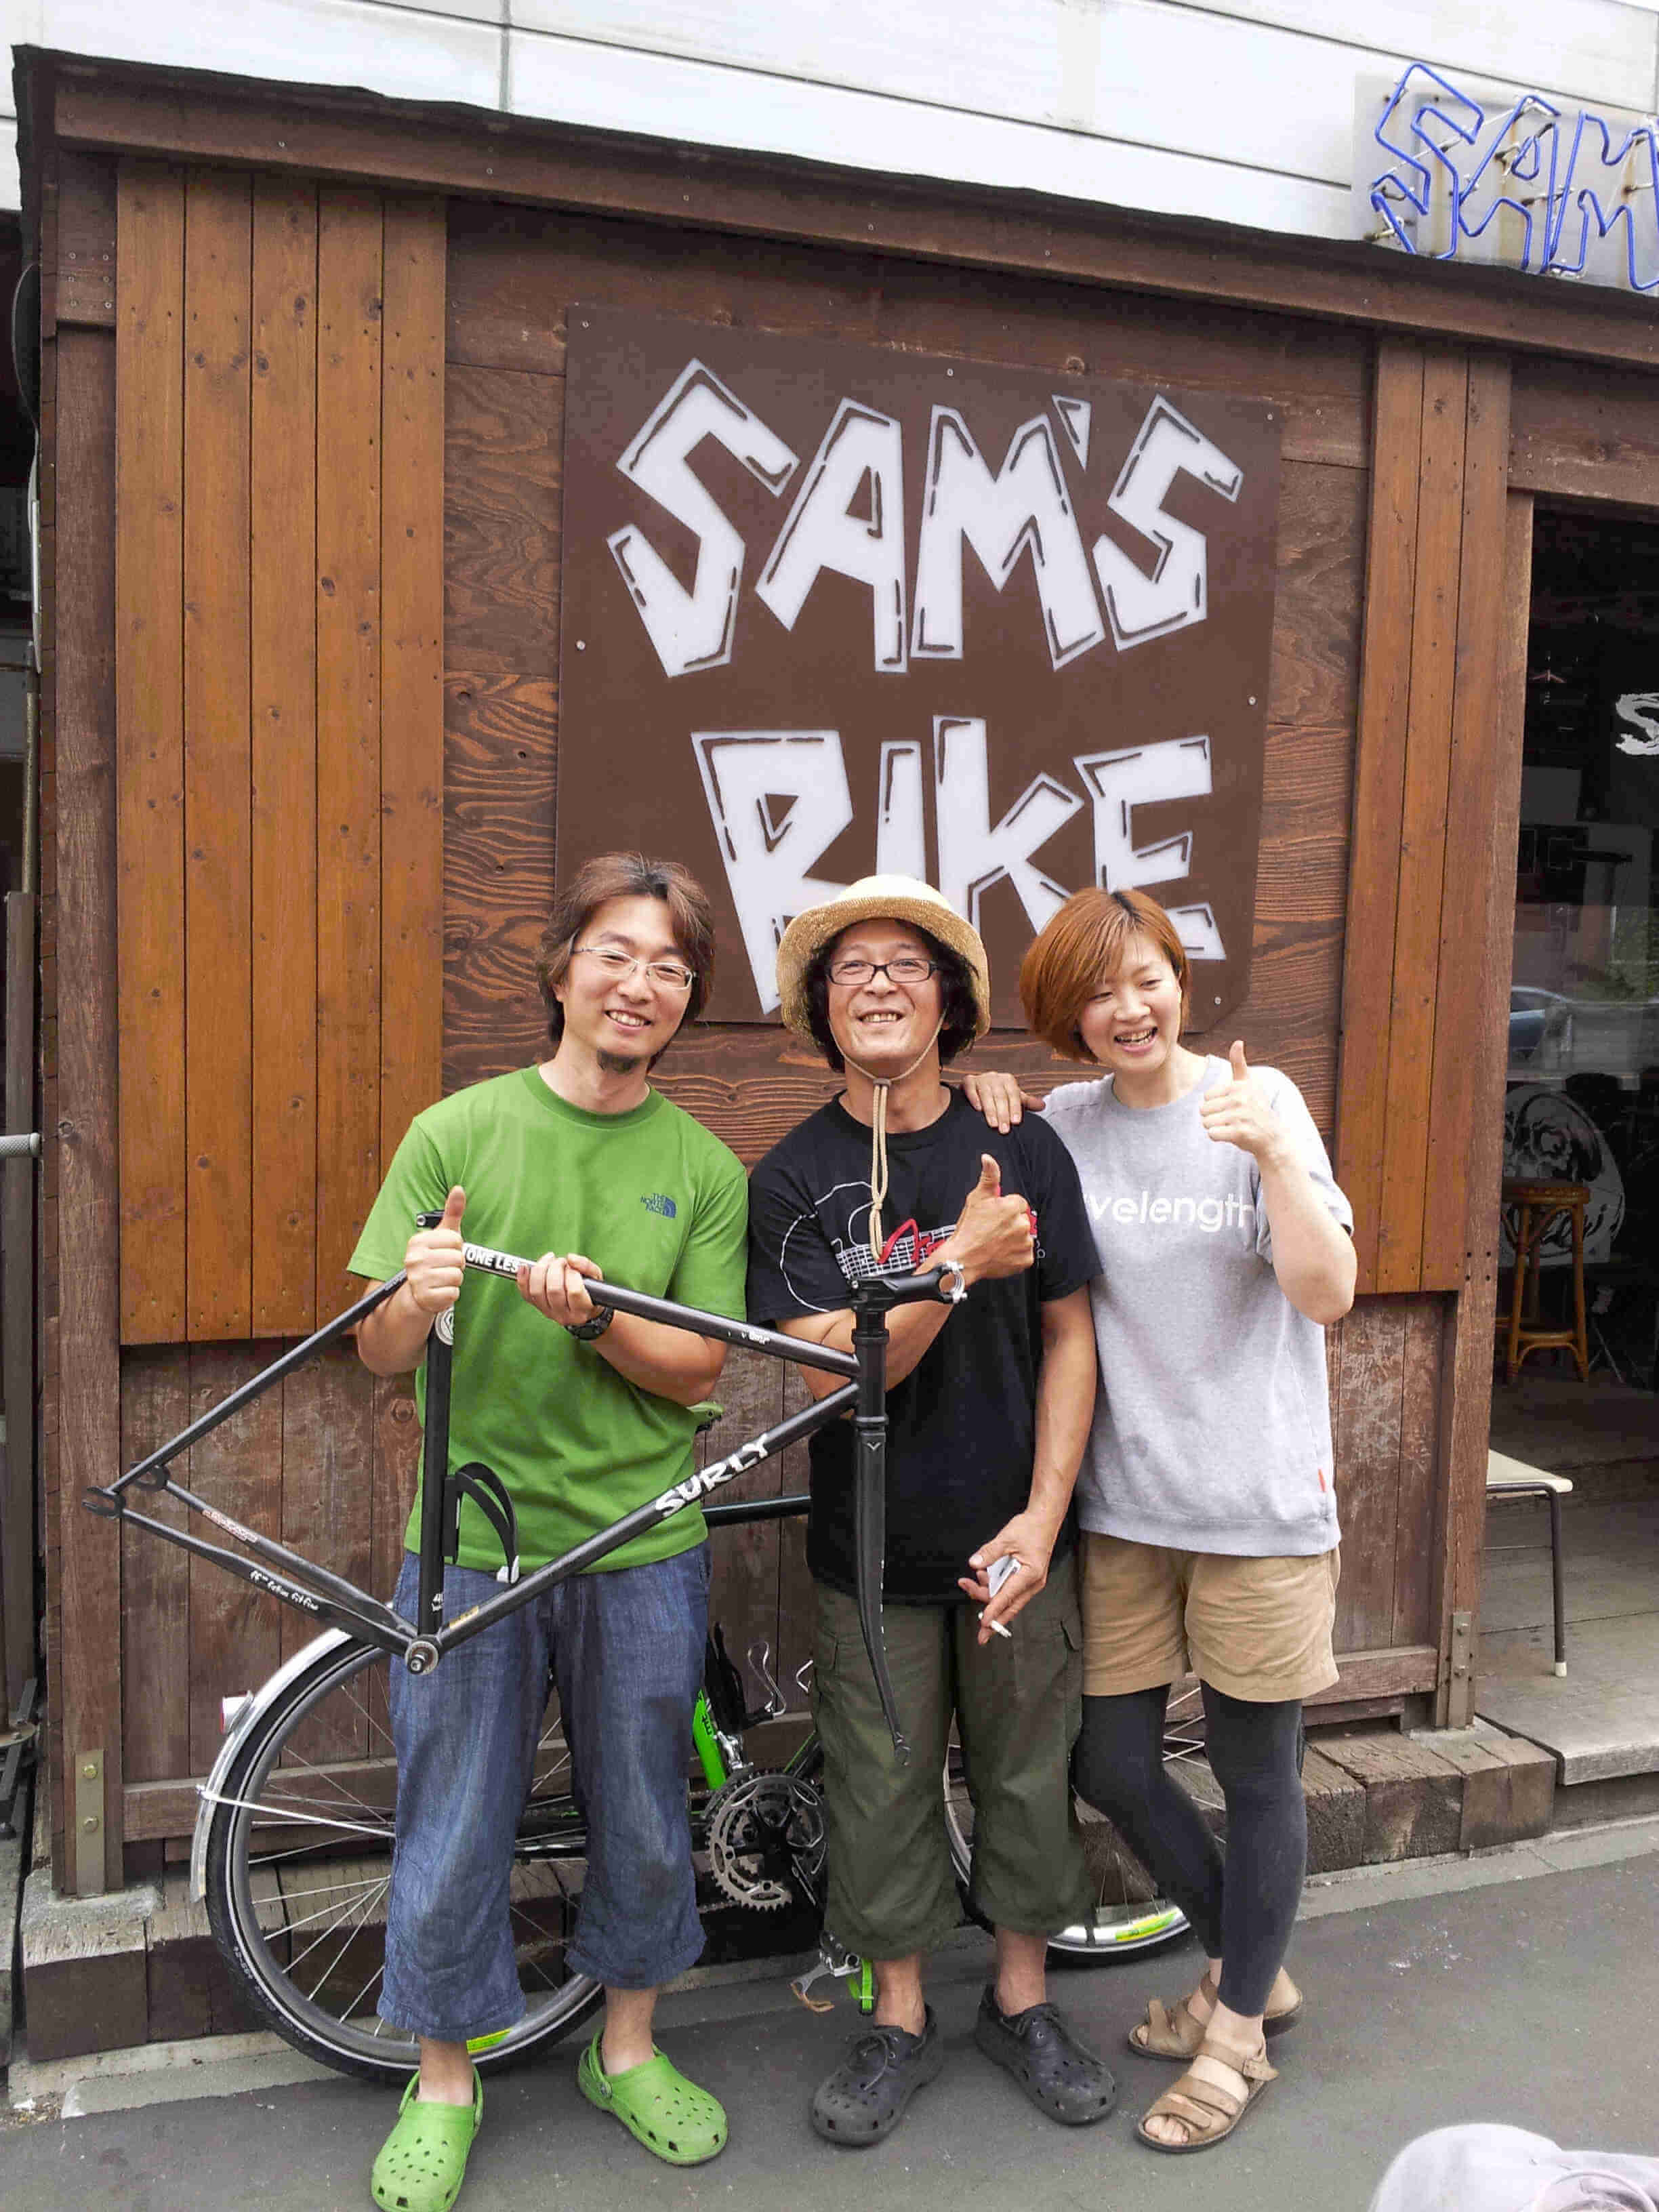 Front view of a person, holding up a Surly bike frameset, standing with 2 other people, outside of Sam's Bike shop